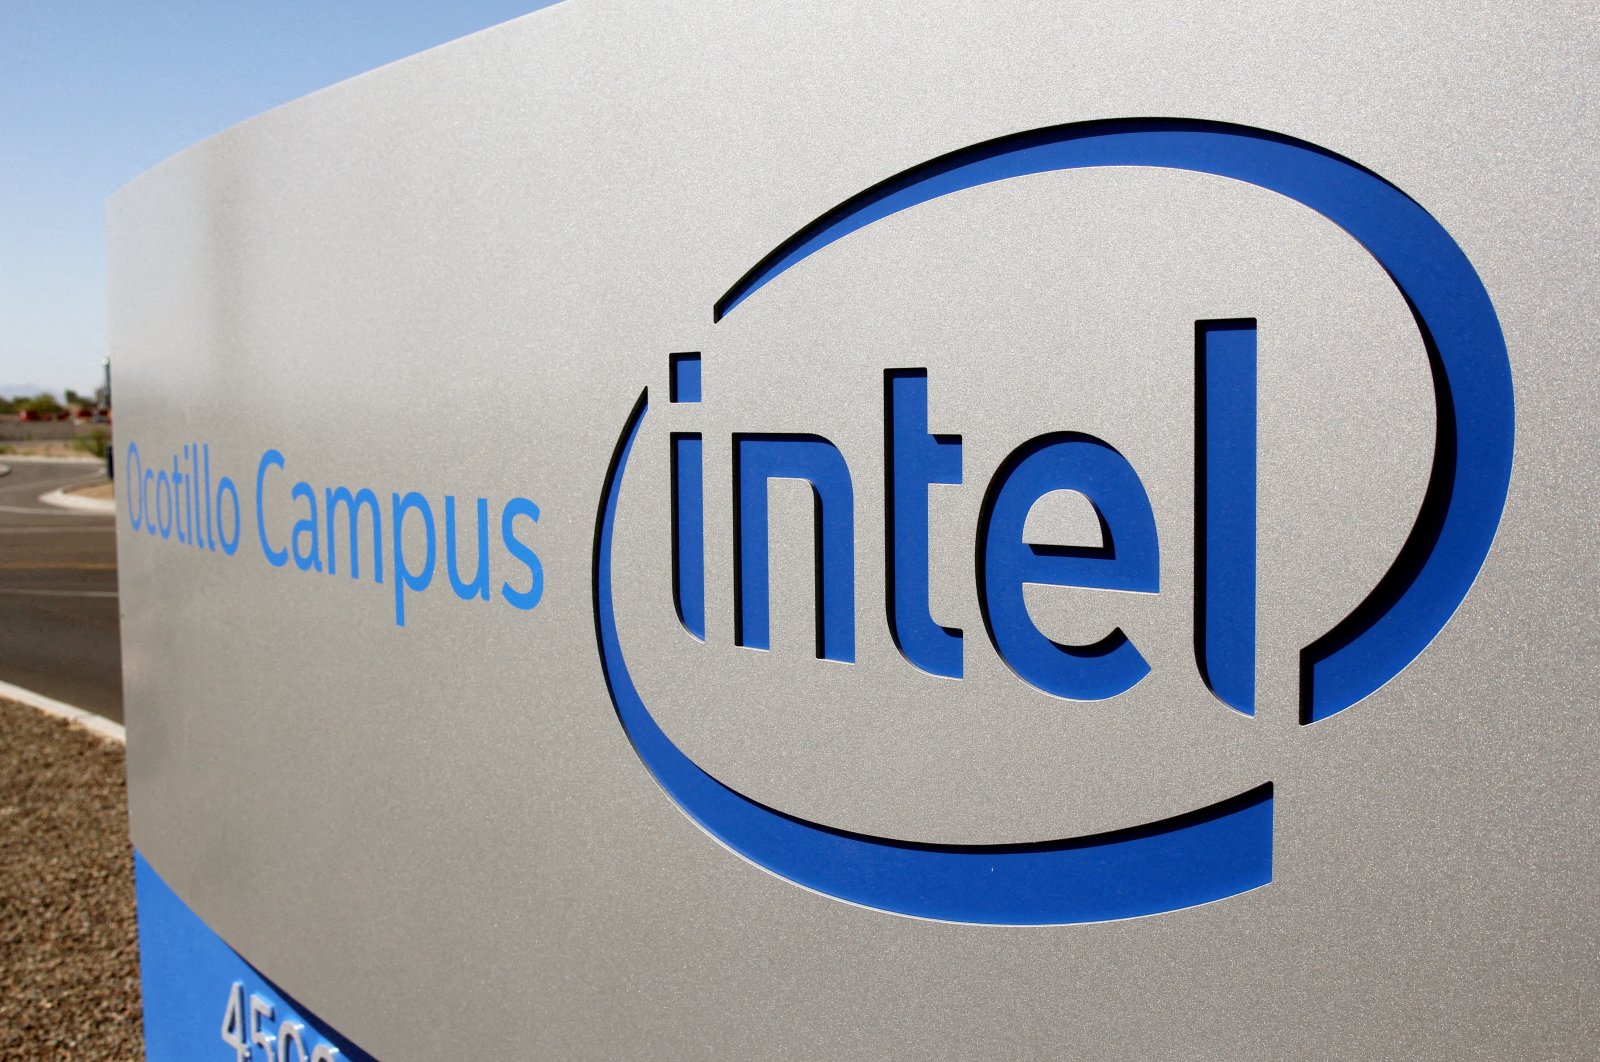 The logo for the Intel Corporation is seen on a sign outside the Fab 42 microprocessor manufacturing site, Chandler, Arizona, U.S., Oct. 2, 2020. (Reuters Photo)